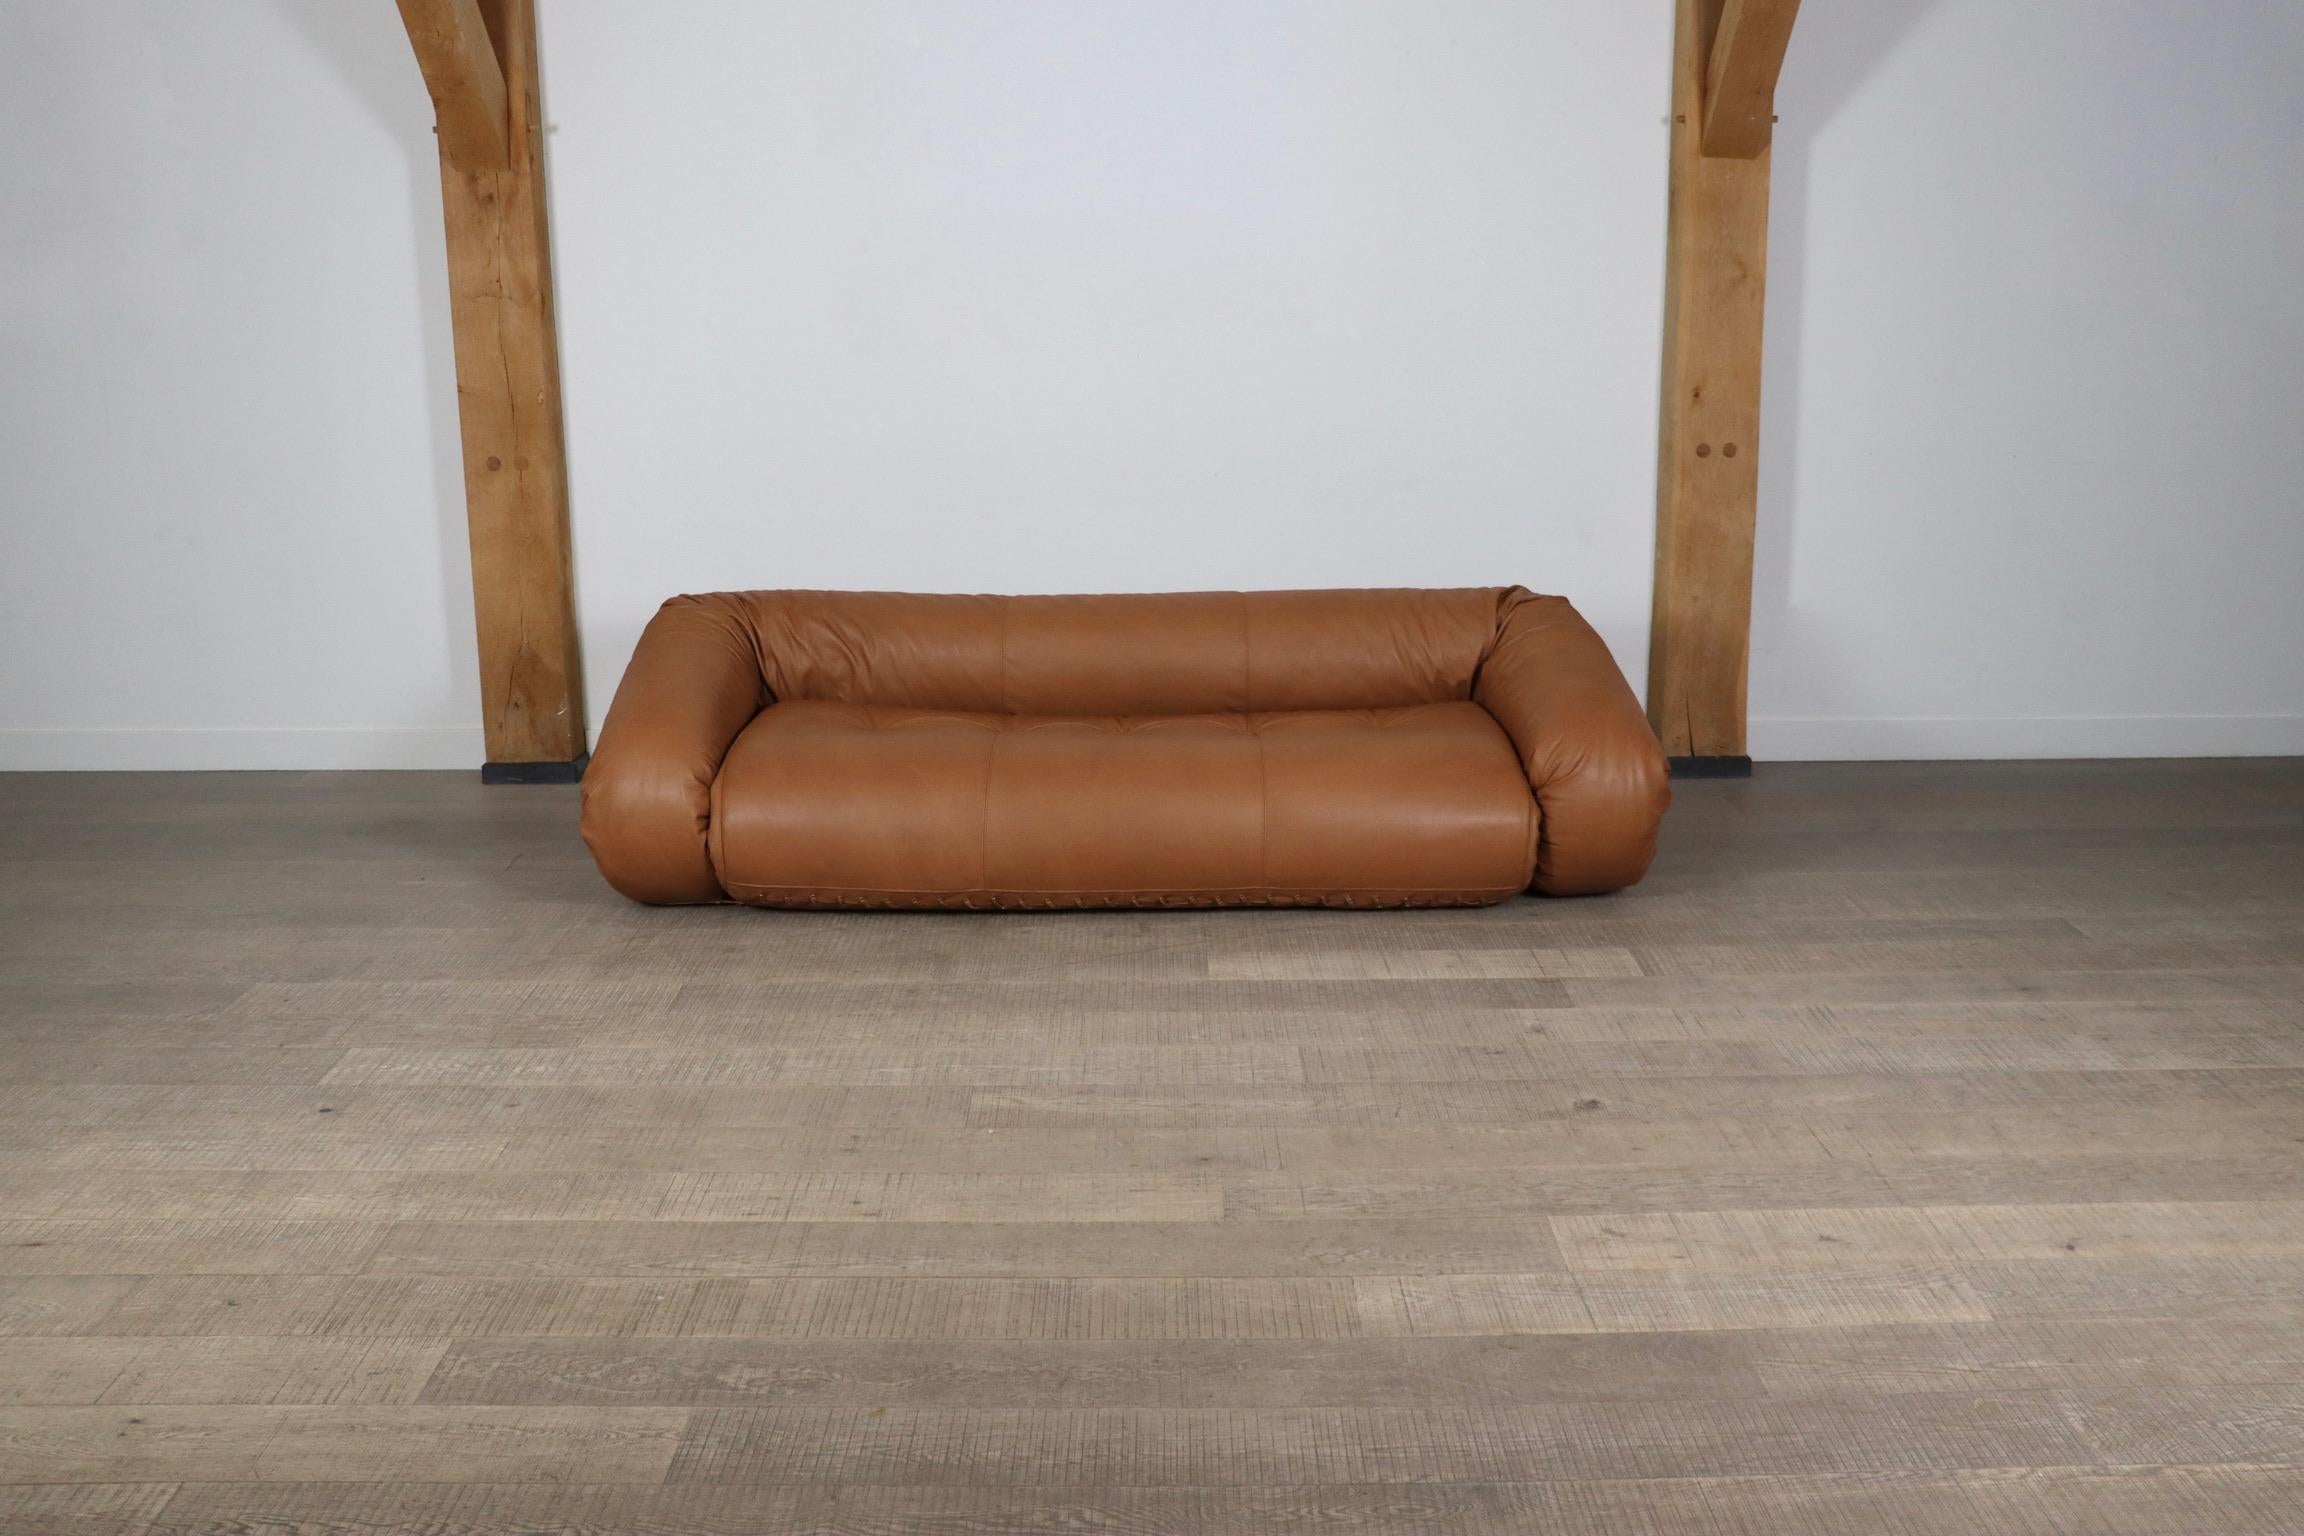 Incredible Anfibio sofa bed by Alessandro Becchi for Giovanetti Collezione Italy 1971. This stunning cognac leather upholstery fits perfectly with the white teddy fabric on the mattress inside. The sofa can easily be converted into a bed, or lounge